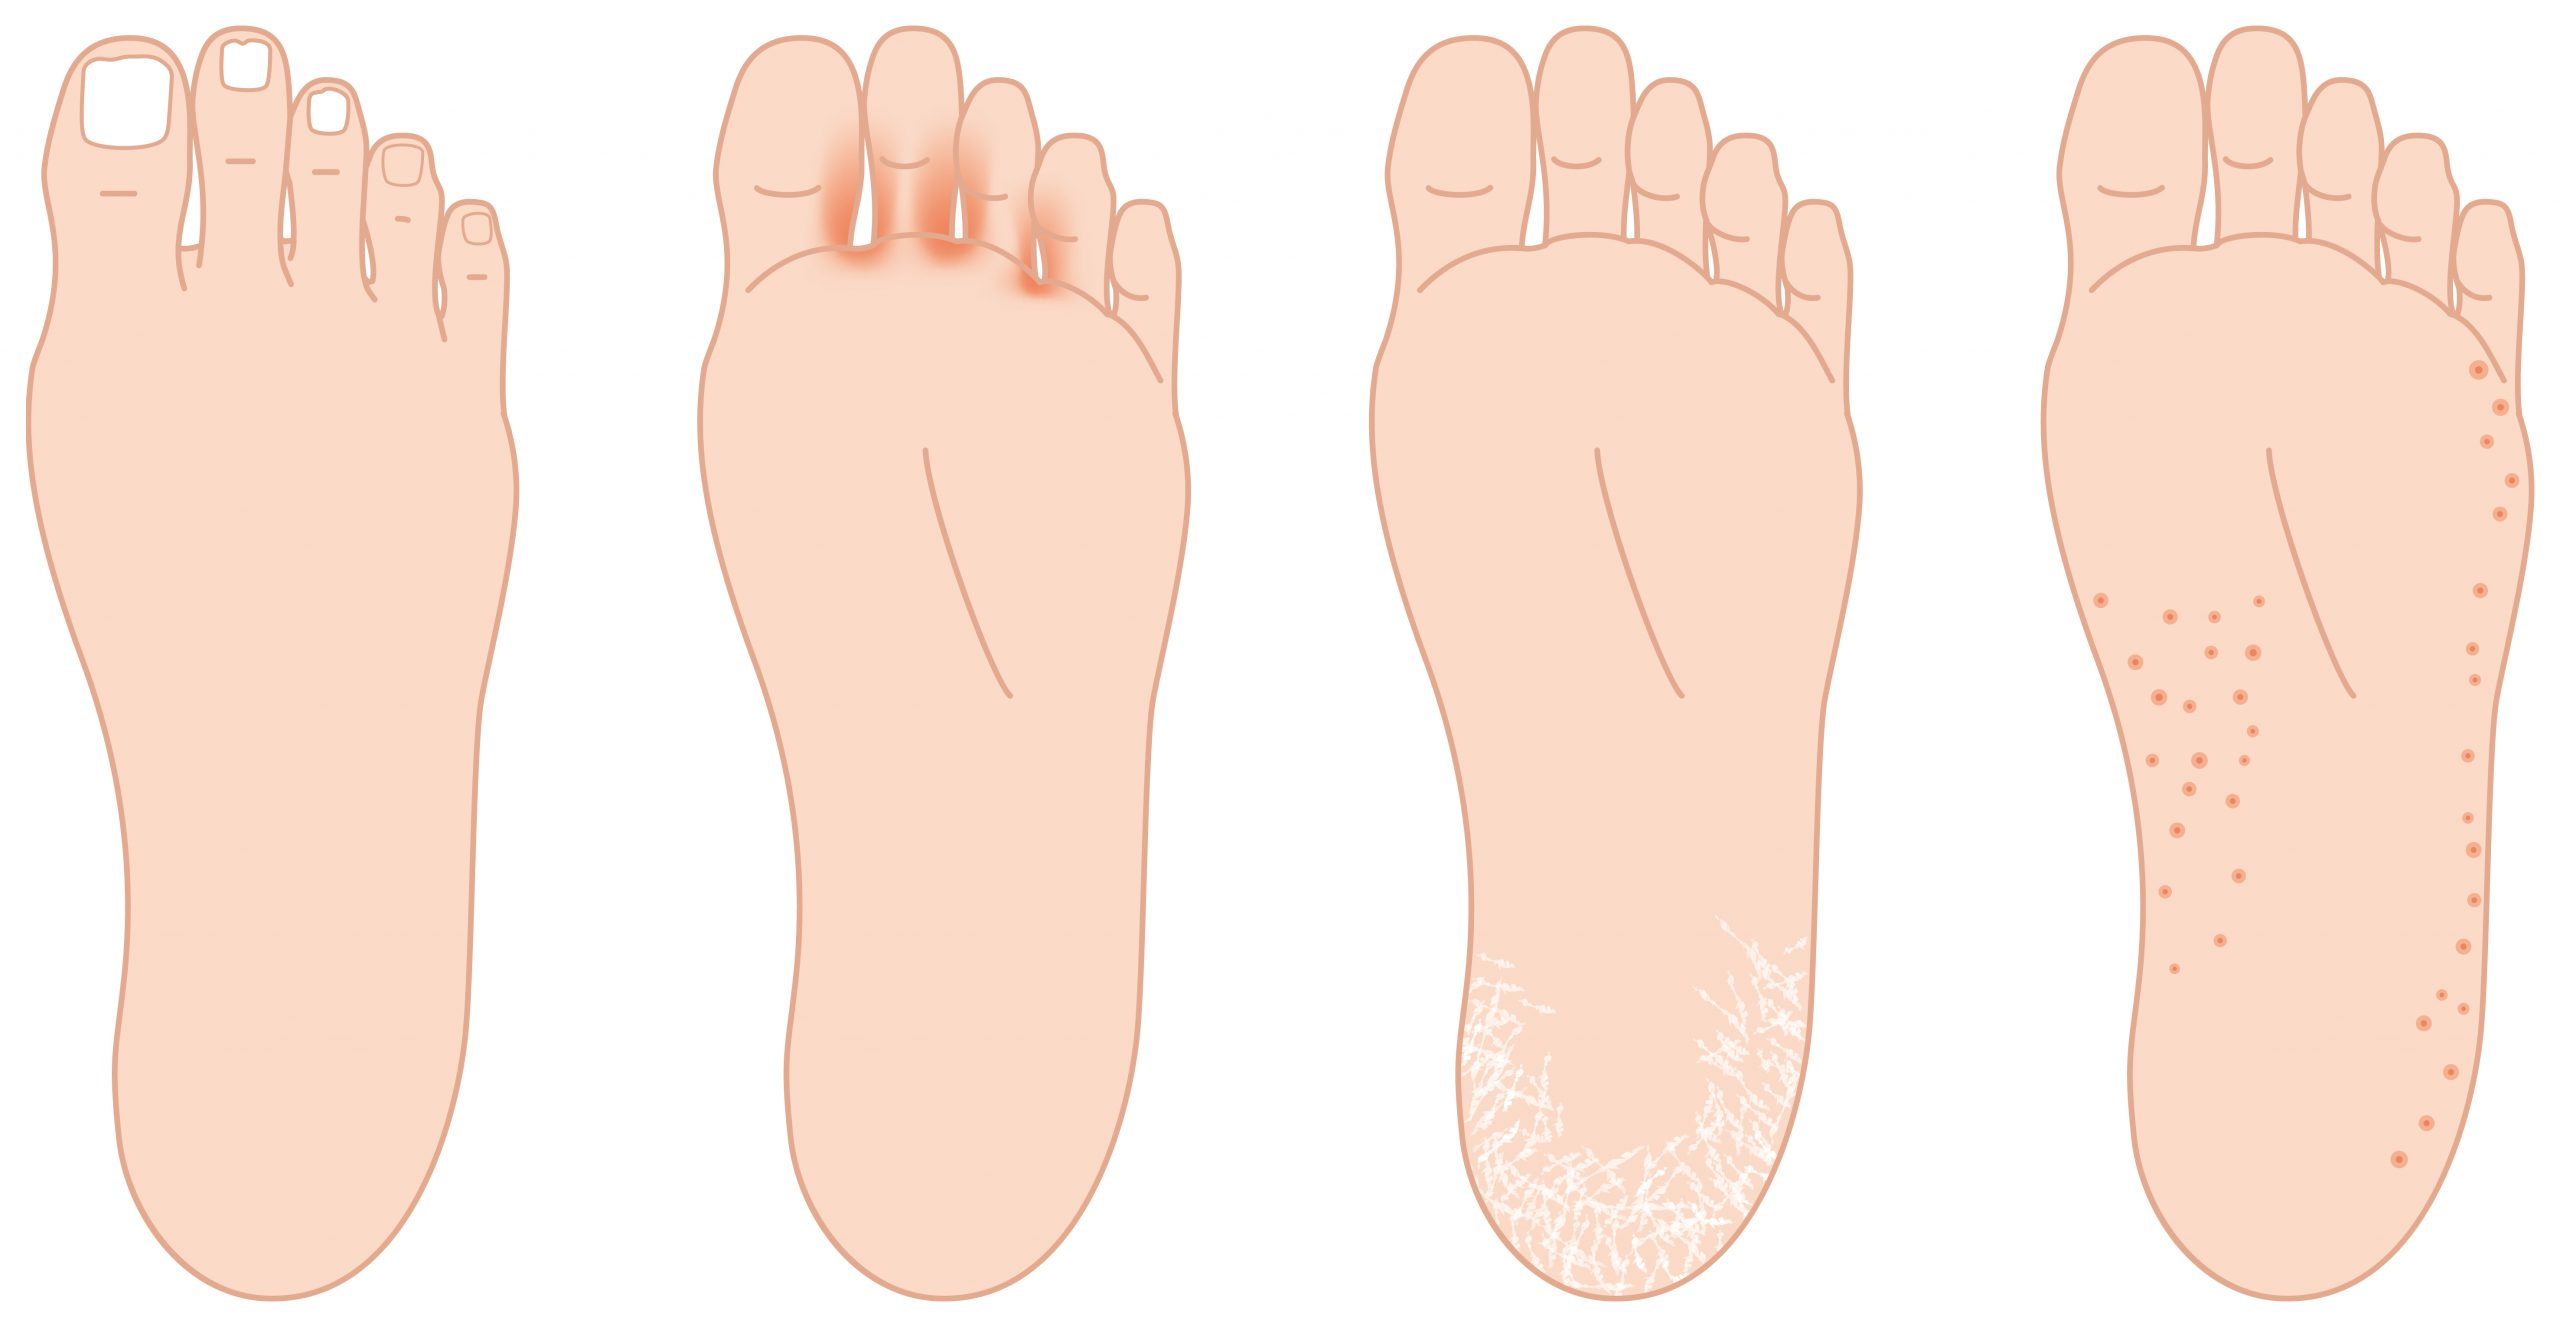 infected skin, moccasin athlete's foot, called athlete's foot